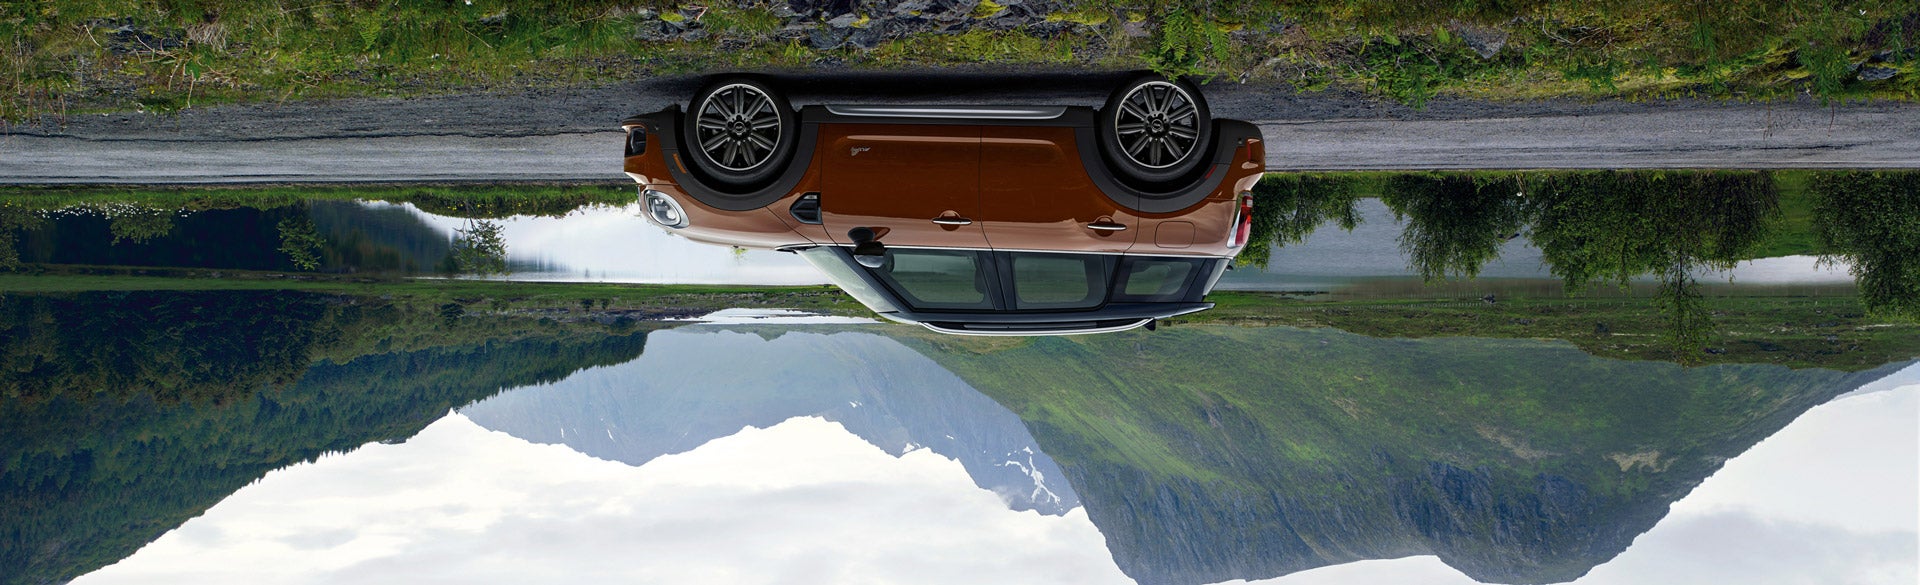 Upside down photo of Chestnut MINI Countryman in front of mountain landscape.